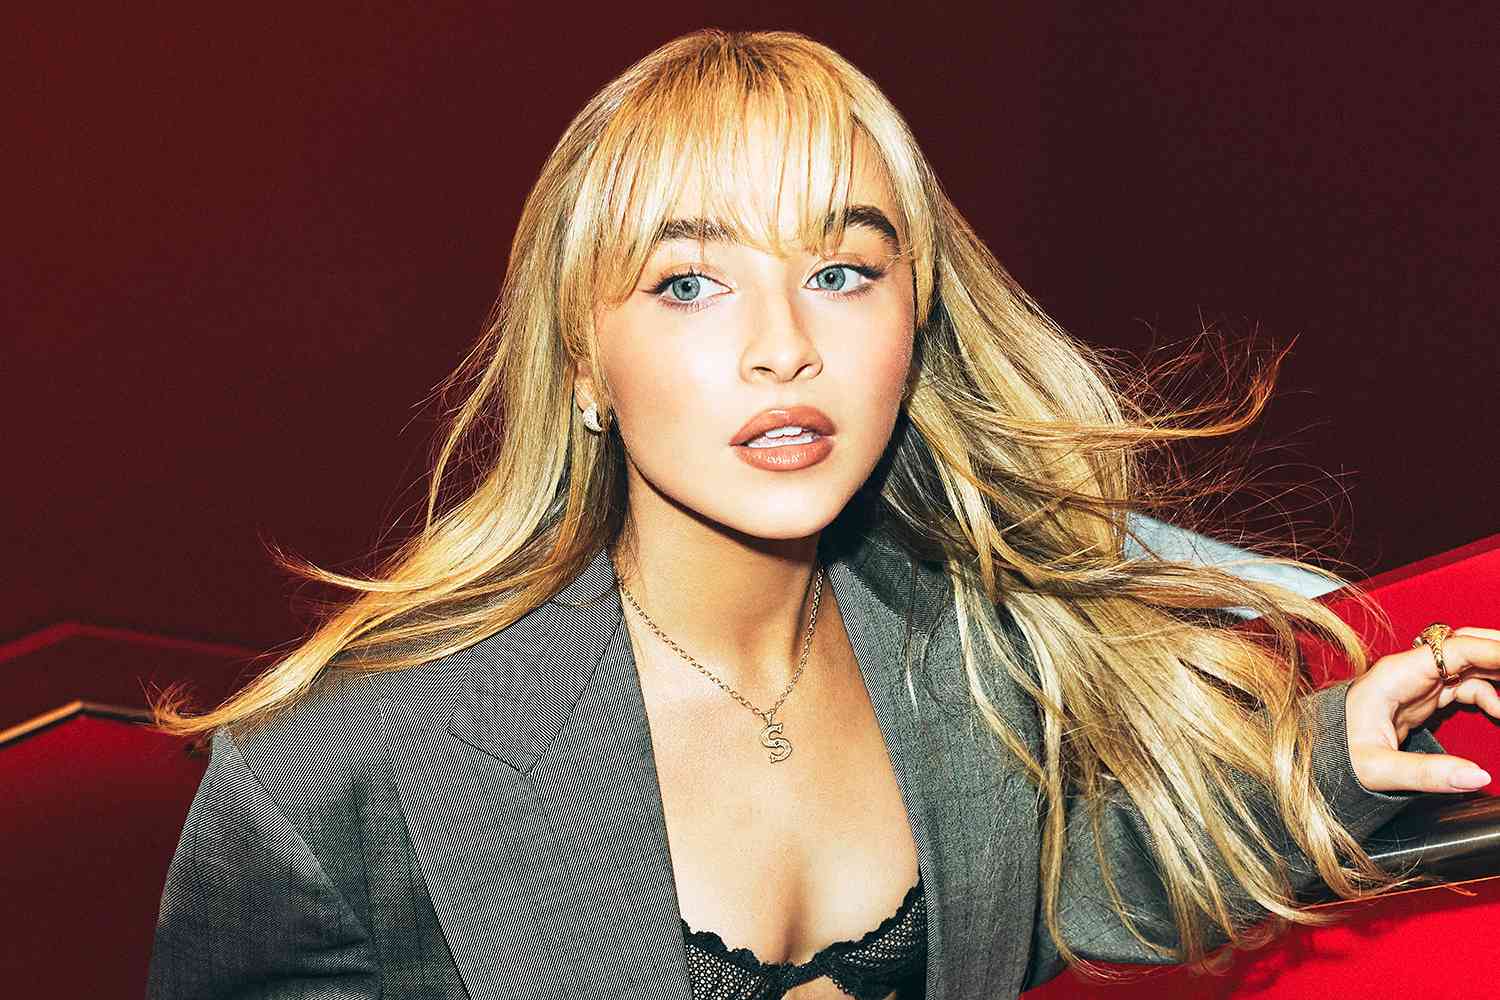 Sabrina Carpenter Says She's Attracted to 'Humor and Energy and Being Genuine' amid Barry Keoghan Romance